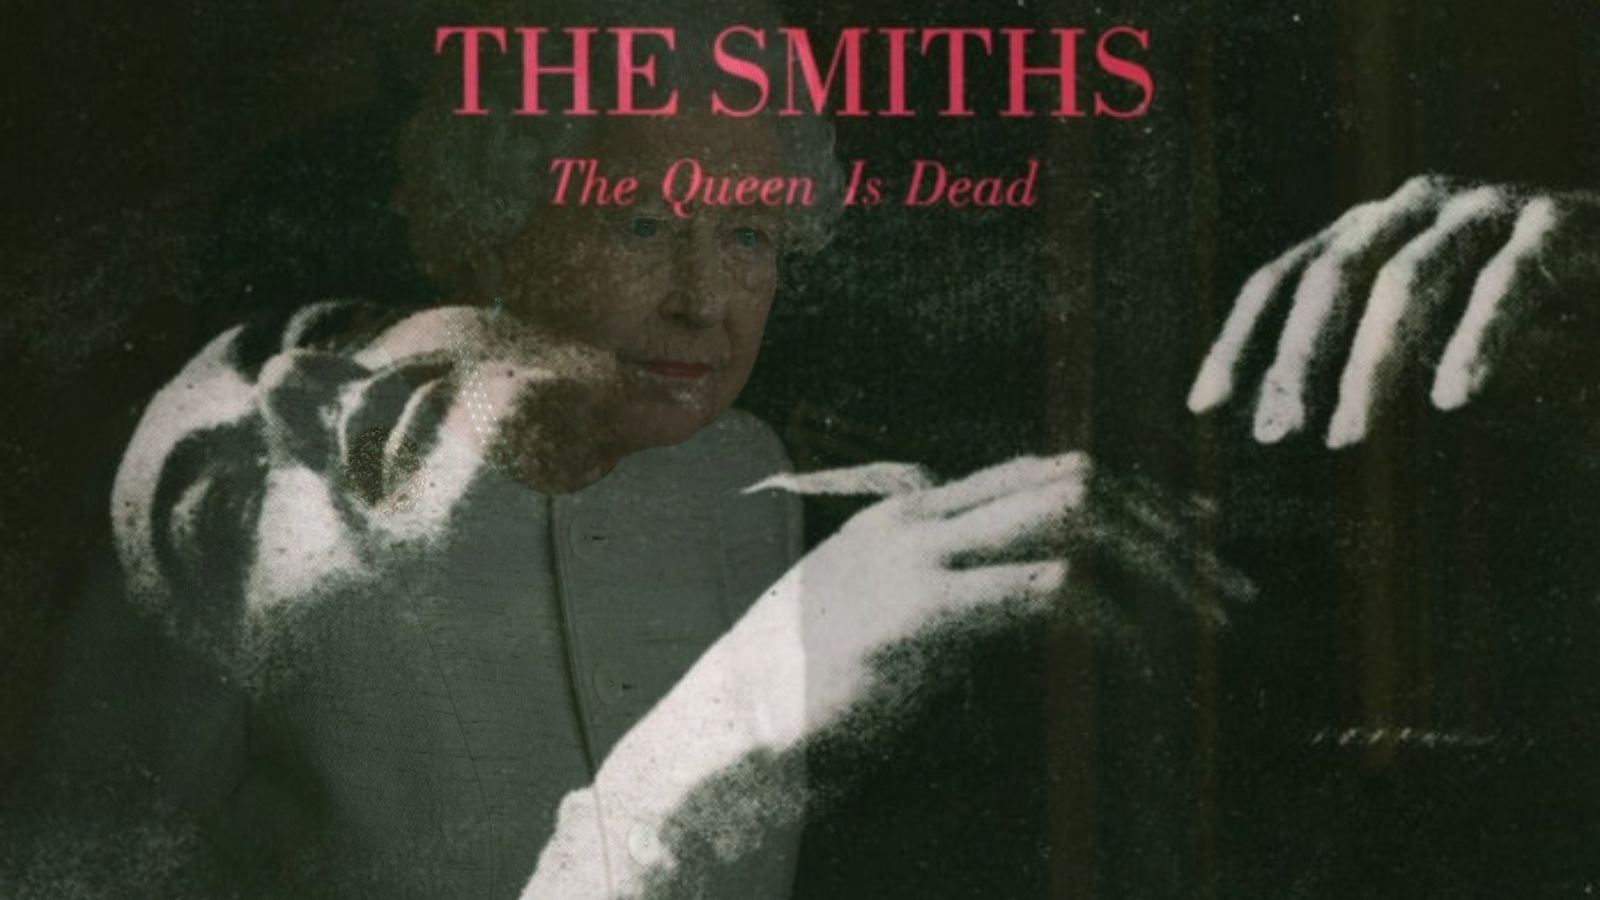 The Smiths are trending after Queen Elizabeth's death